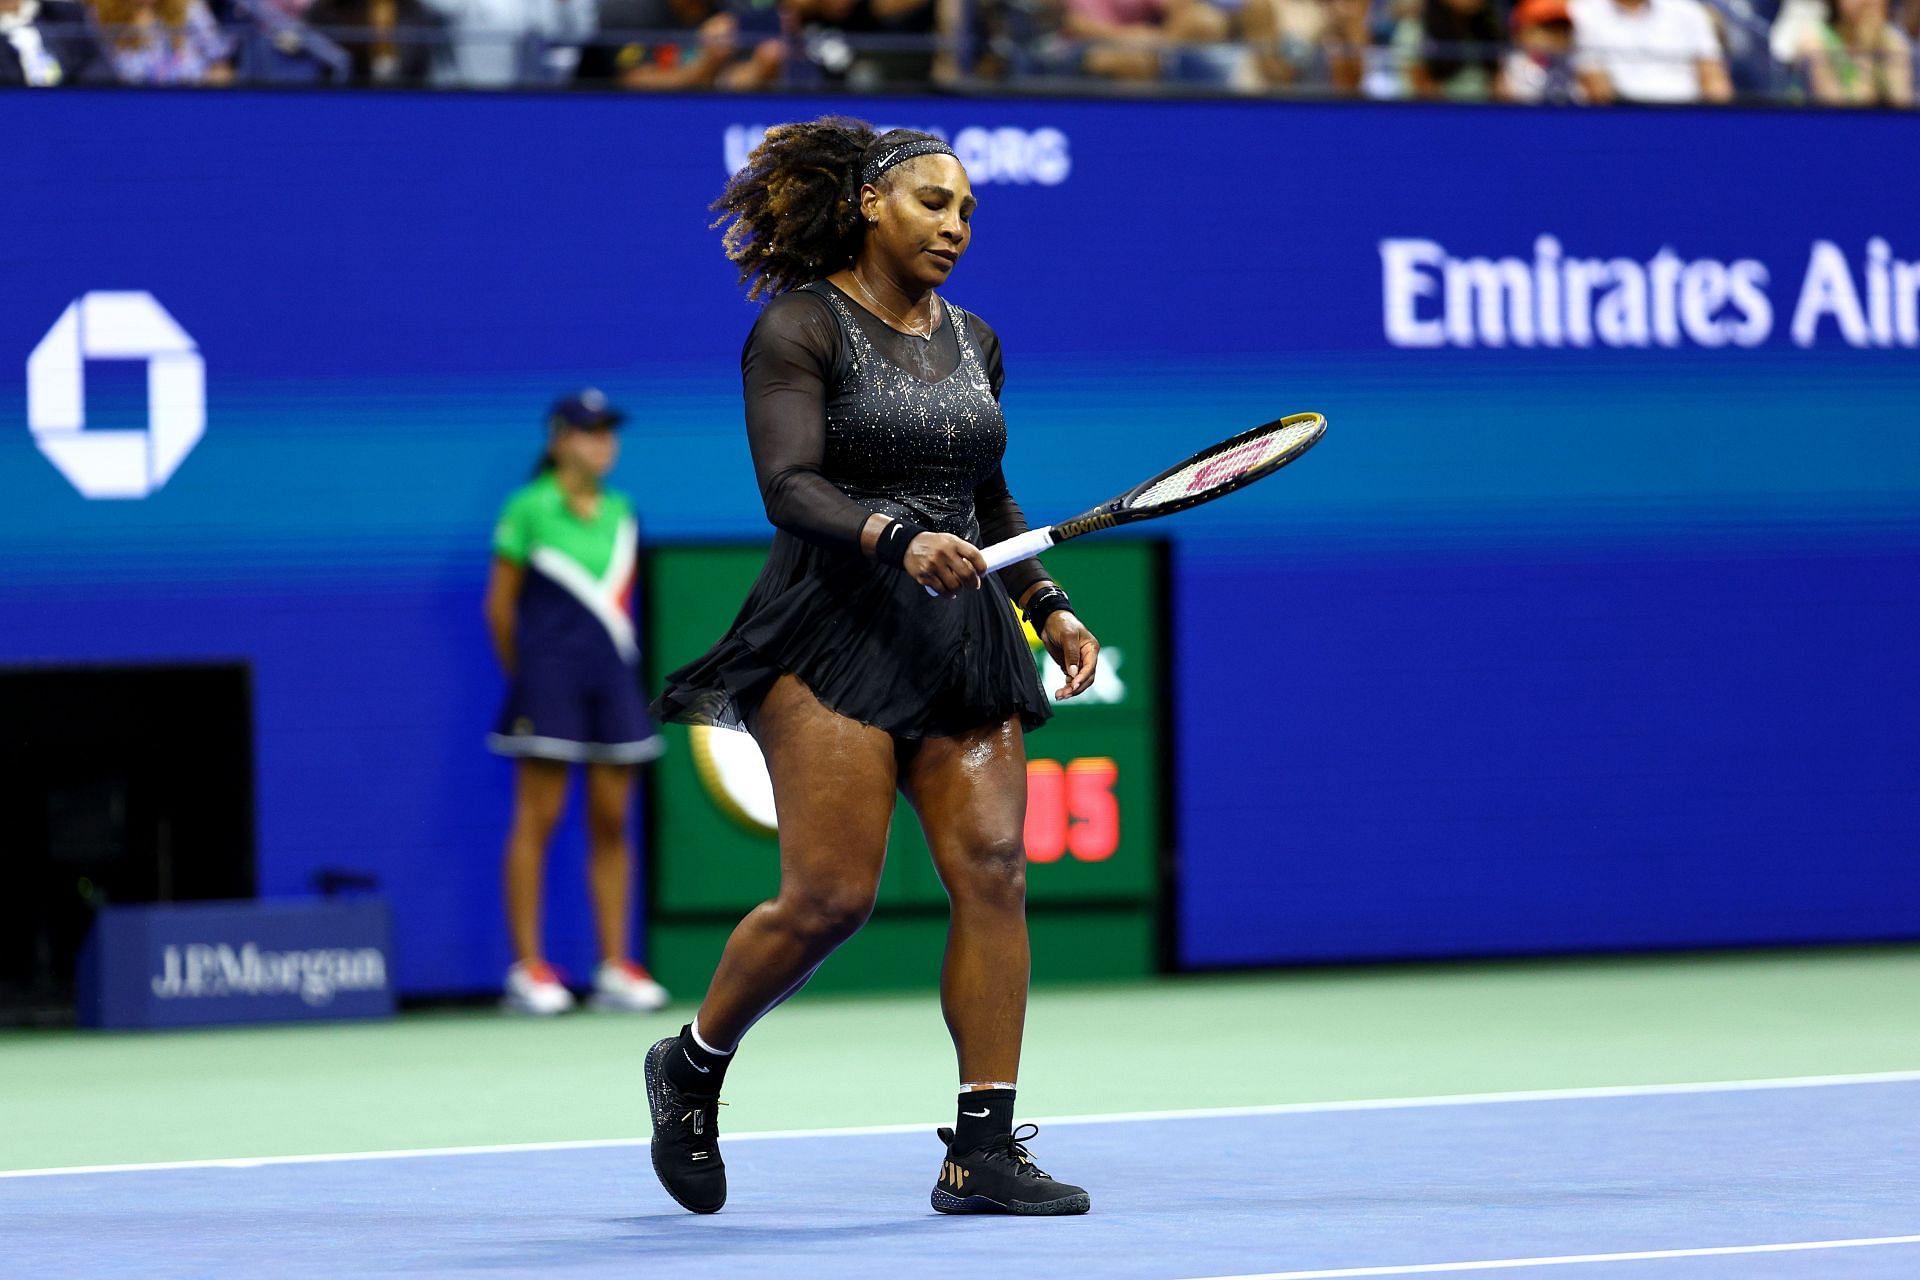 Serena Williams reacts in the third set against Ajla Tomlijanovic at the 2022 US Open